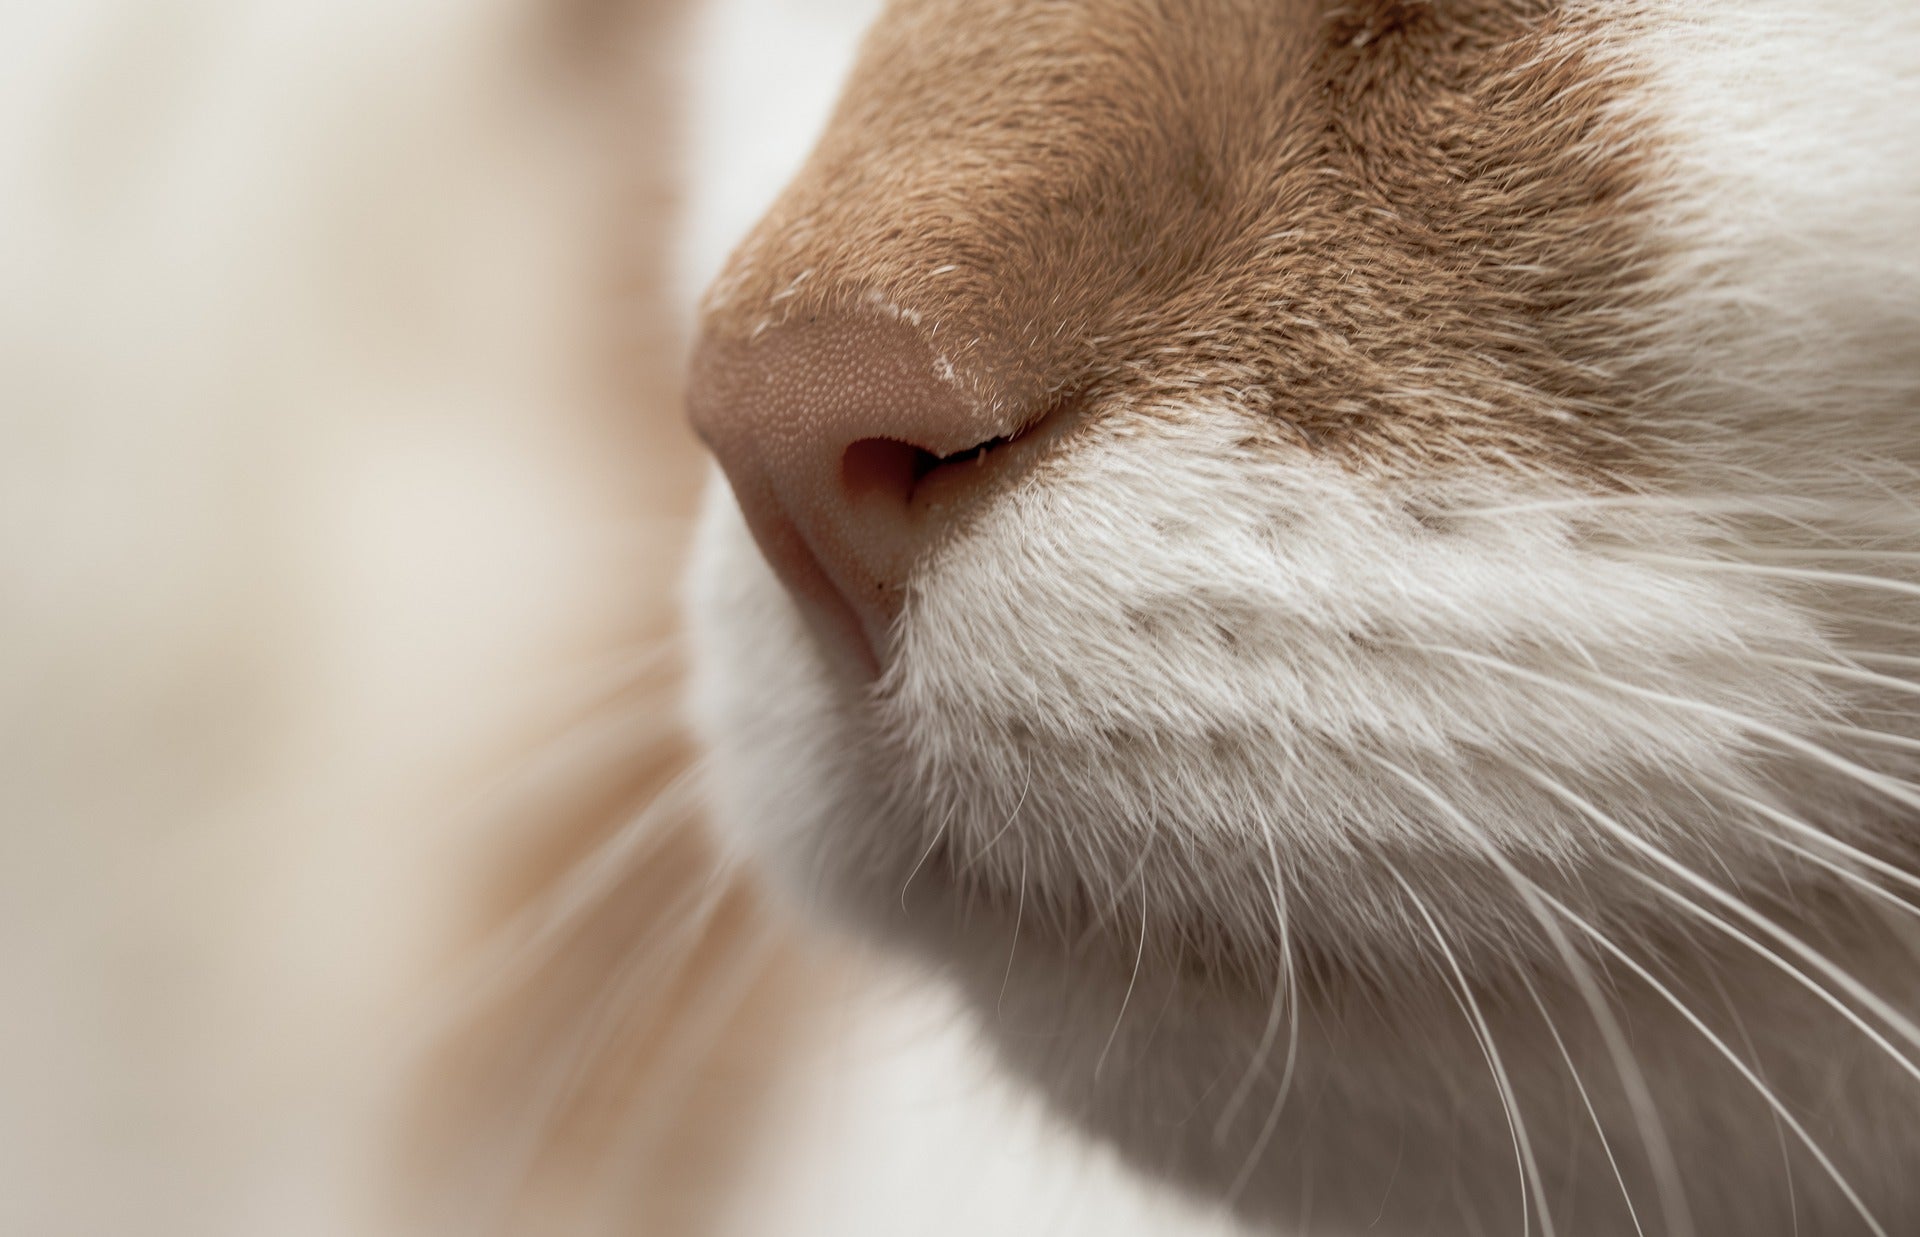 Why_do_cats_have_wet_noses_1920x.jpg?v=1